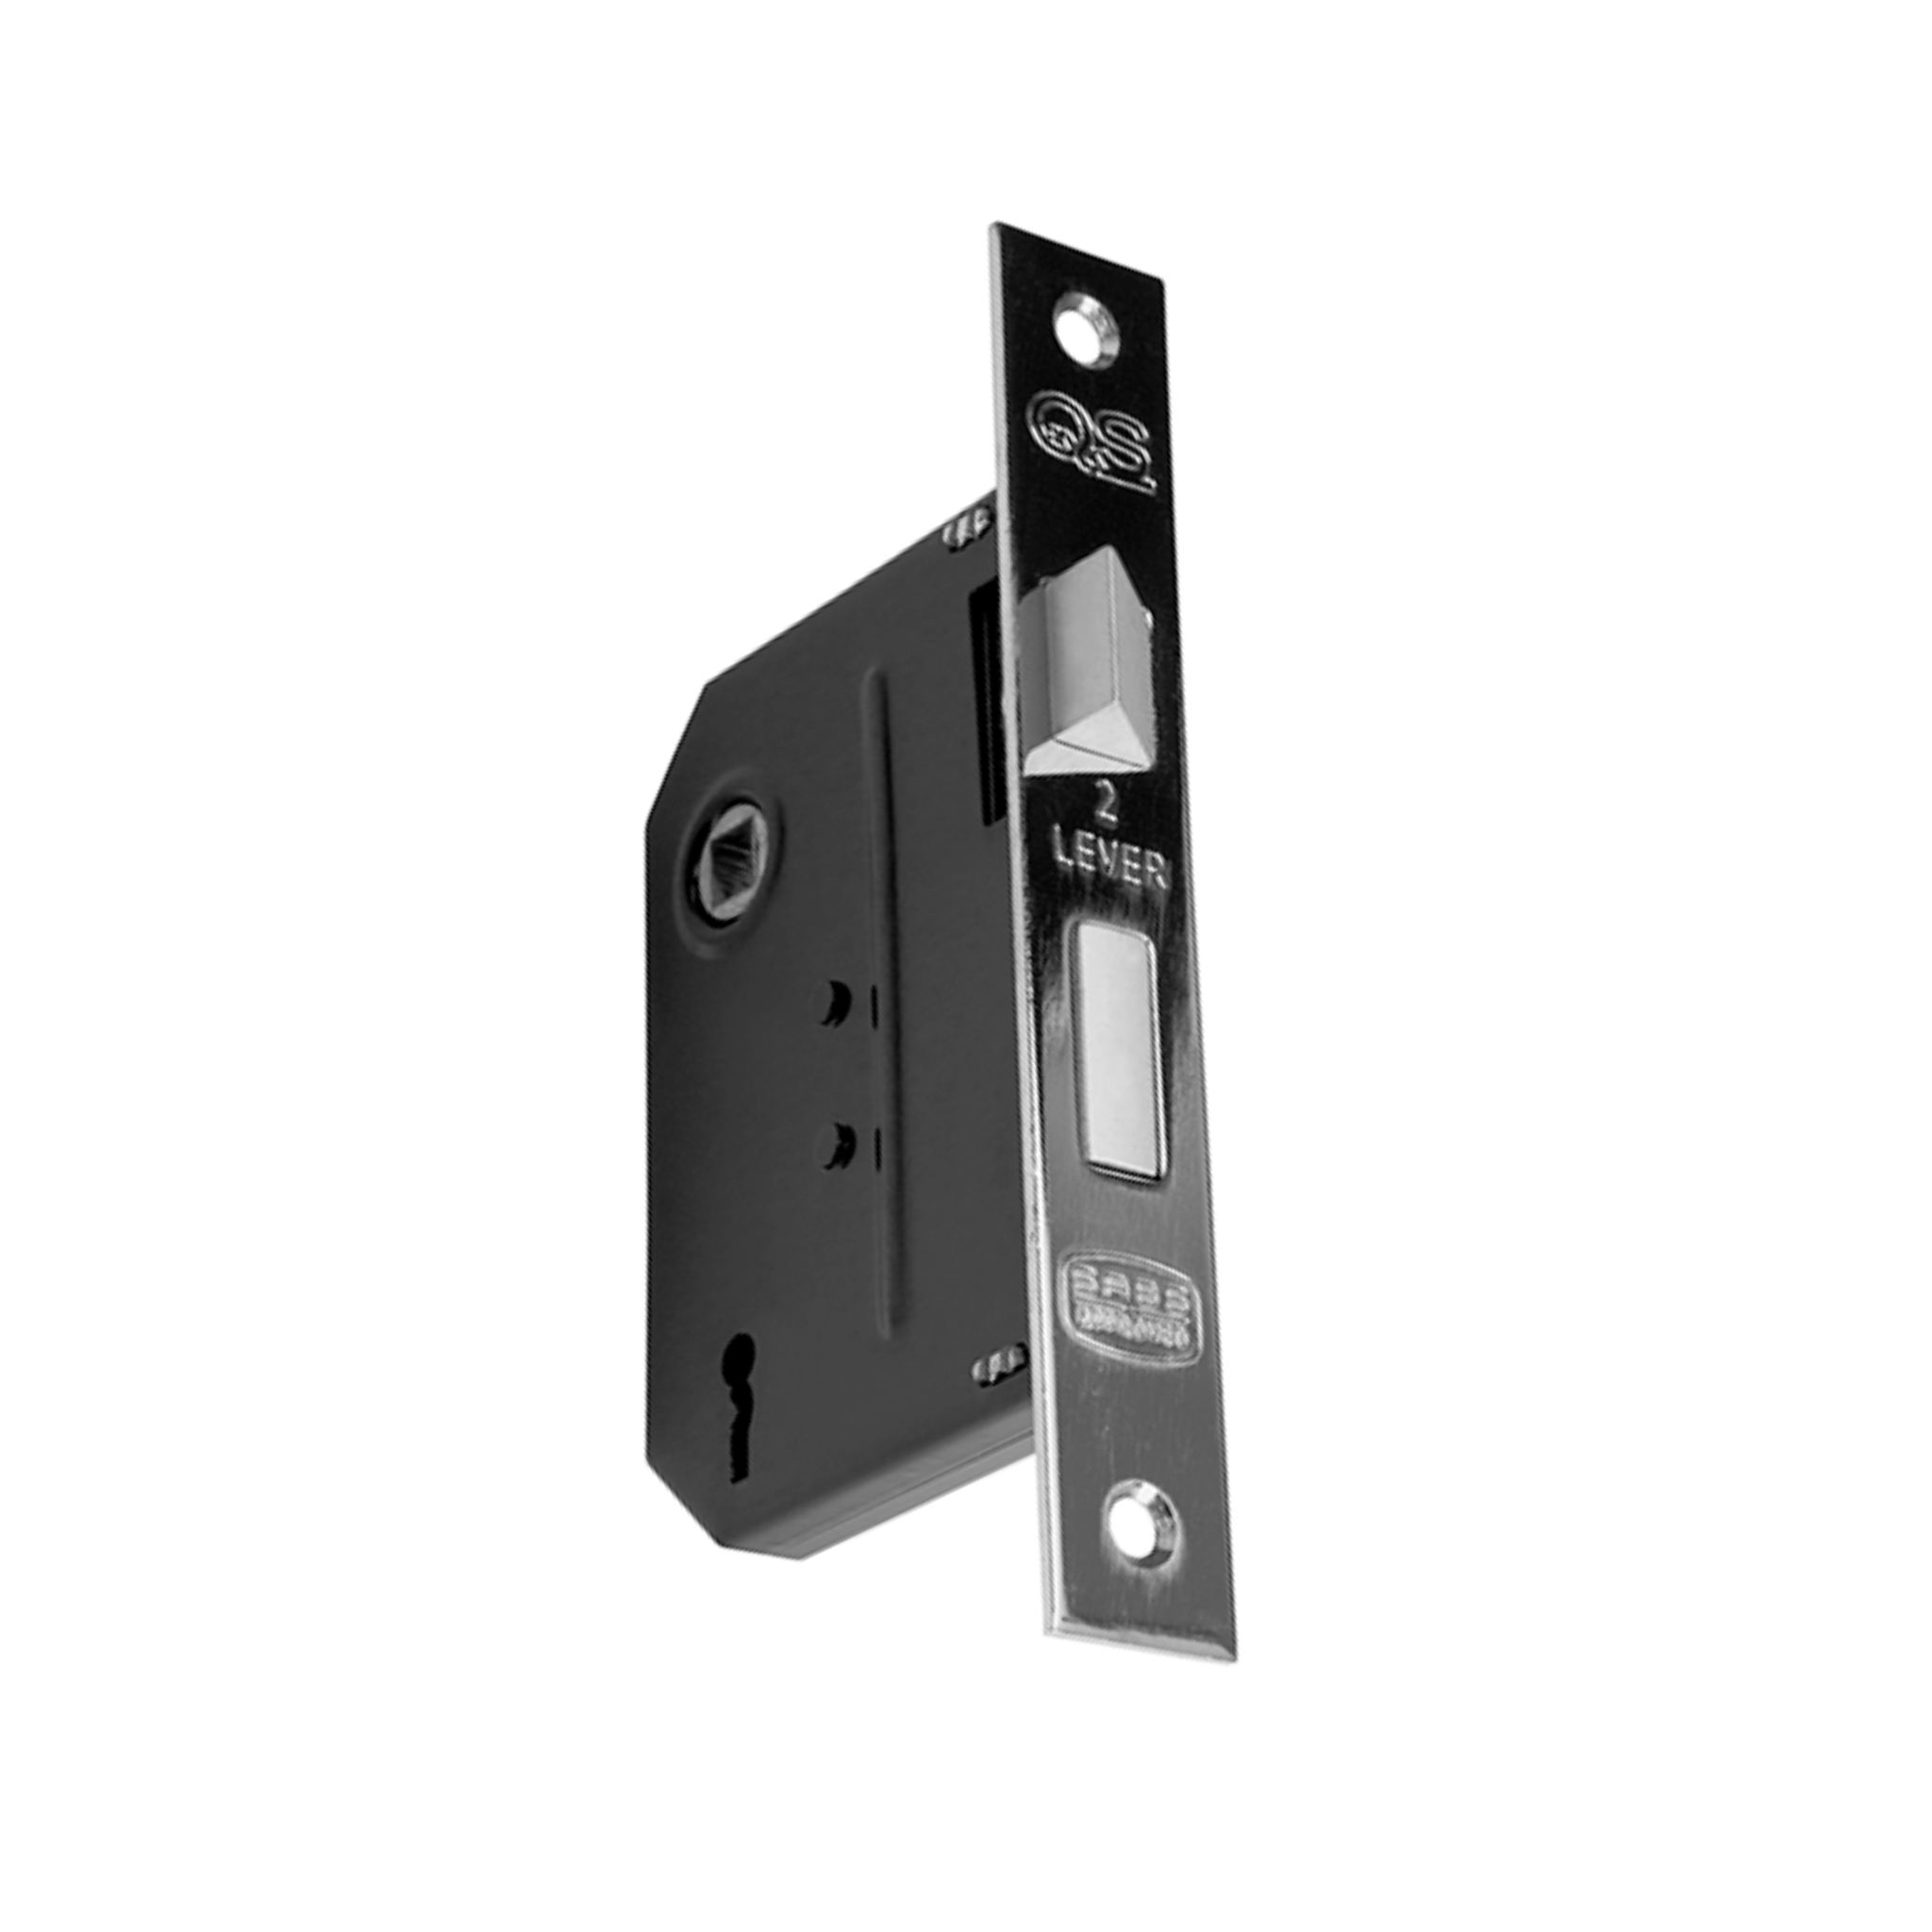 QS5757/2L, SABS approved, Multiple Lever, Latch & Deadbolt Lock, Lever (Key), 2 Lever Lock, 57mm (Backset), 57mm (ctc), With reversable Screw, SABS approved, Stainless Steel, QS